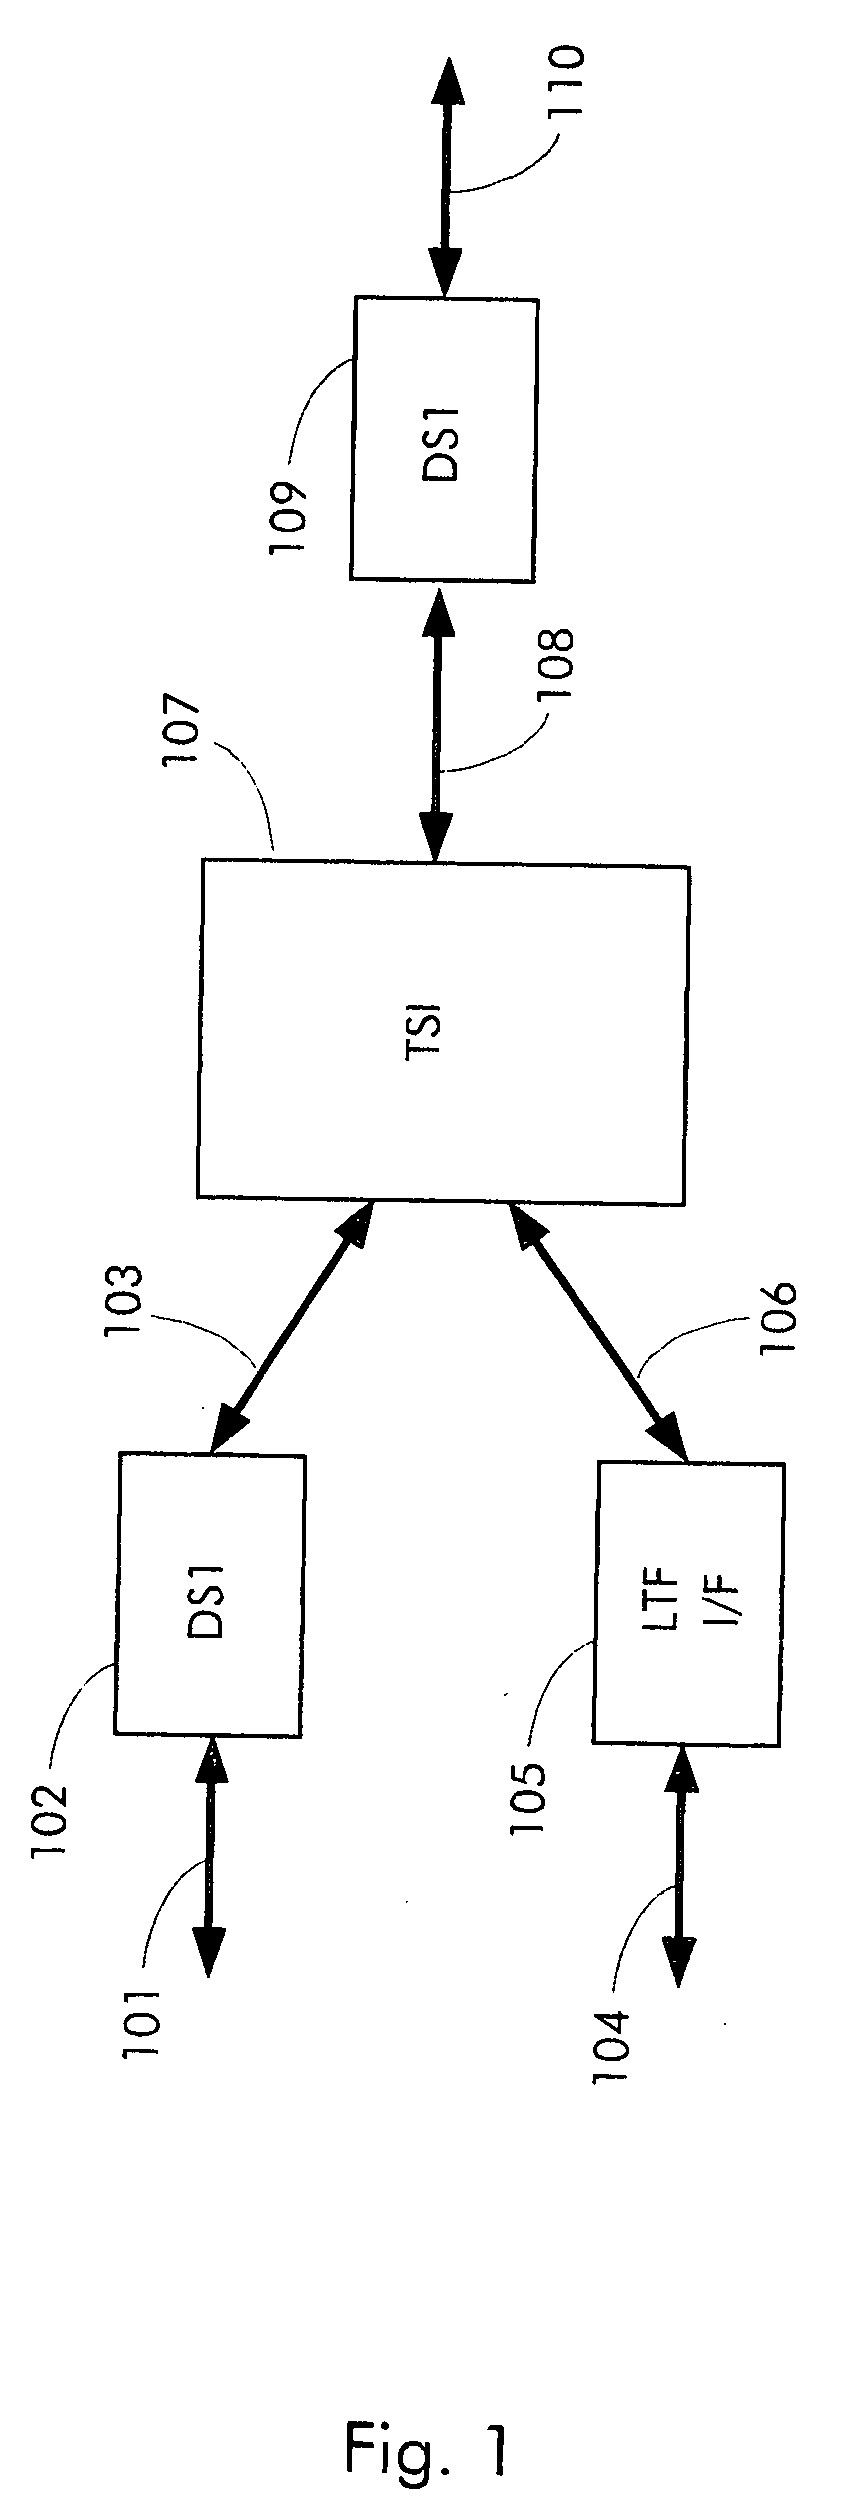 Method and system for combining a conversion between time-division multiplexed digital signals and packetized digital signals with a switching system interface